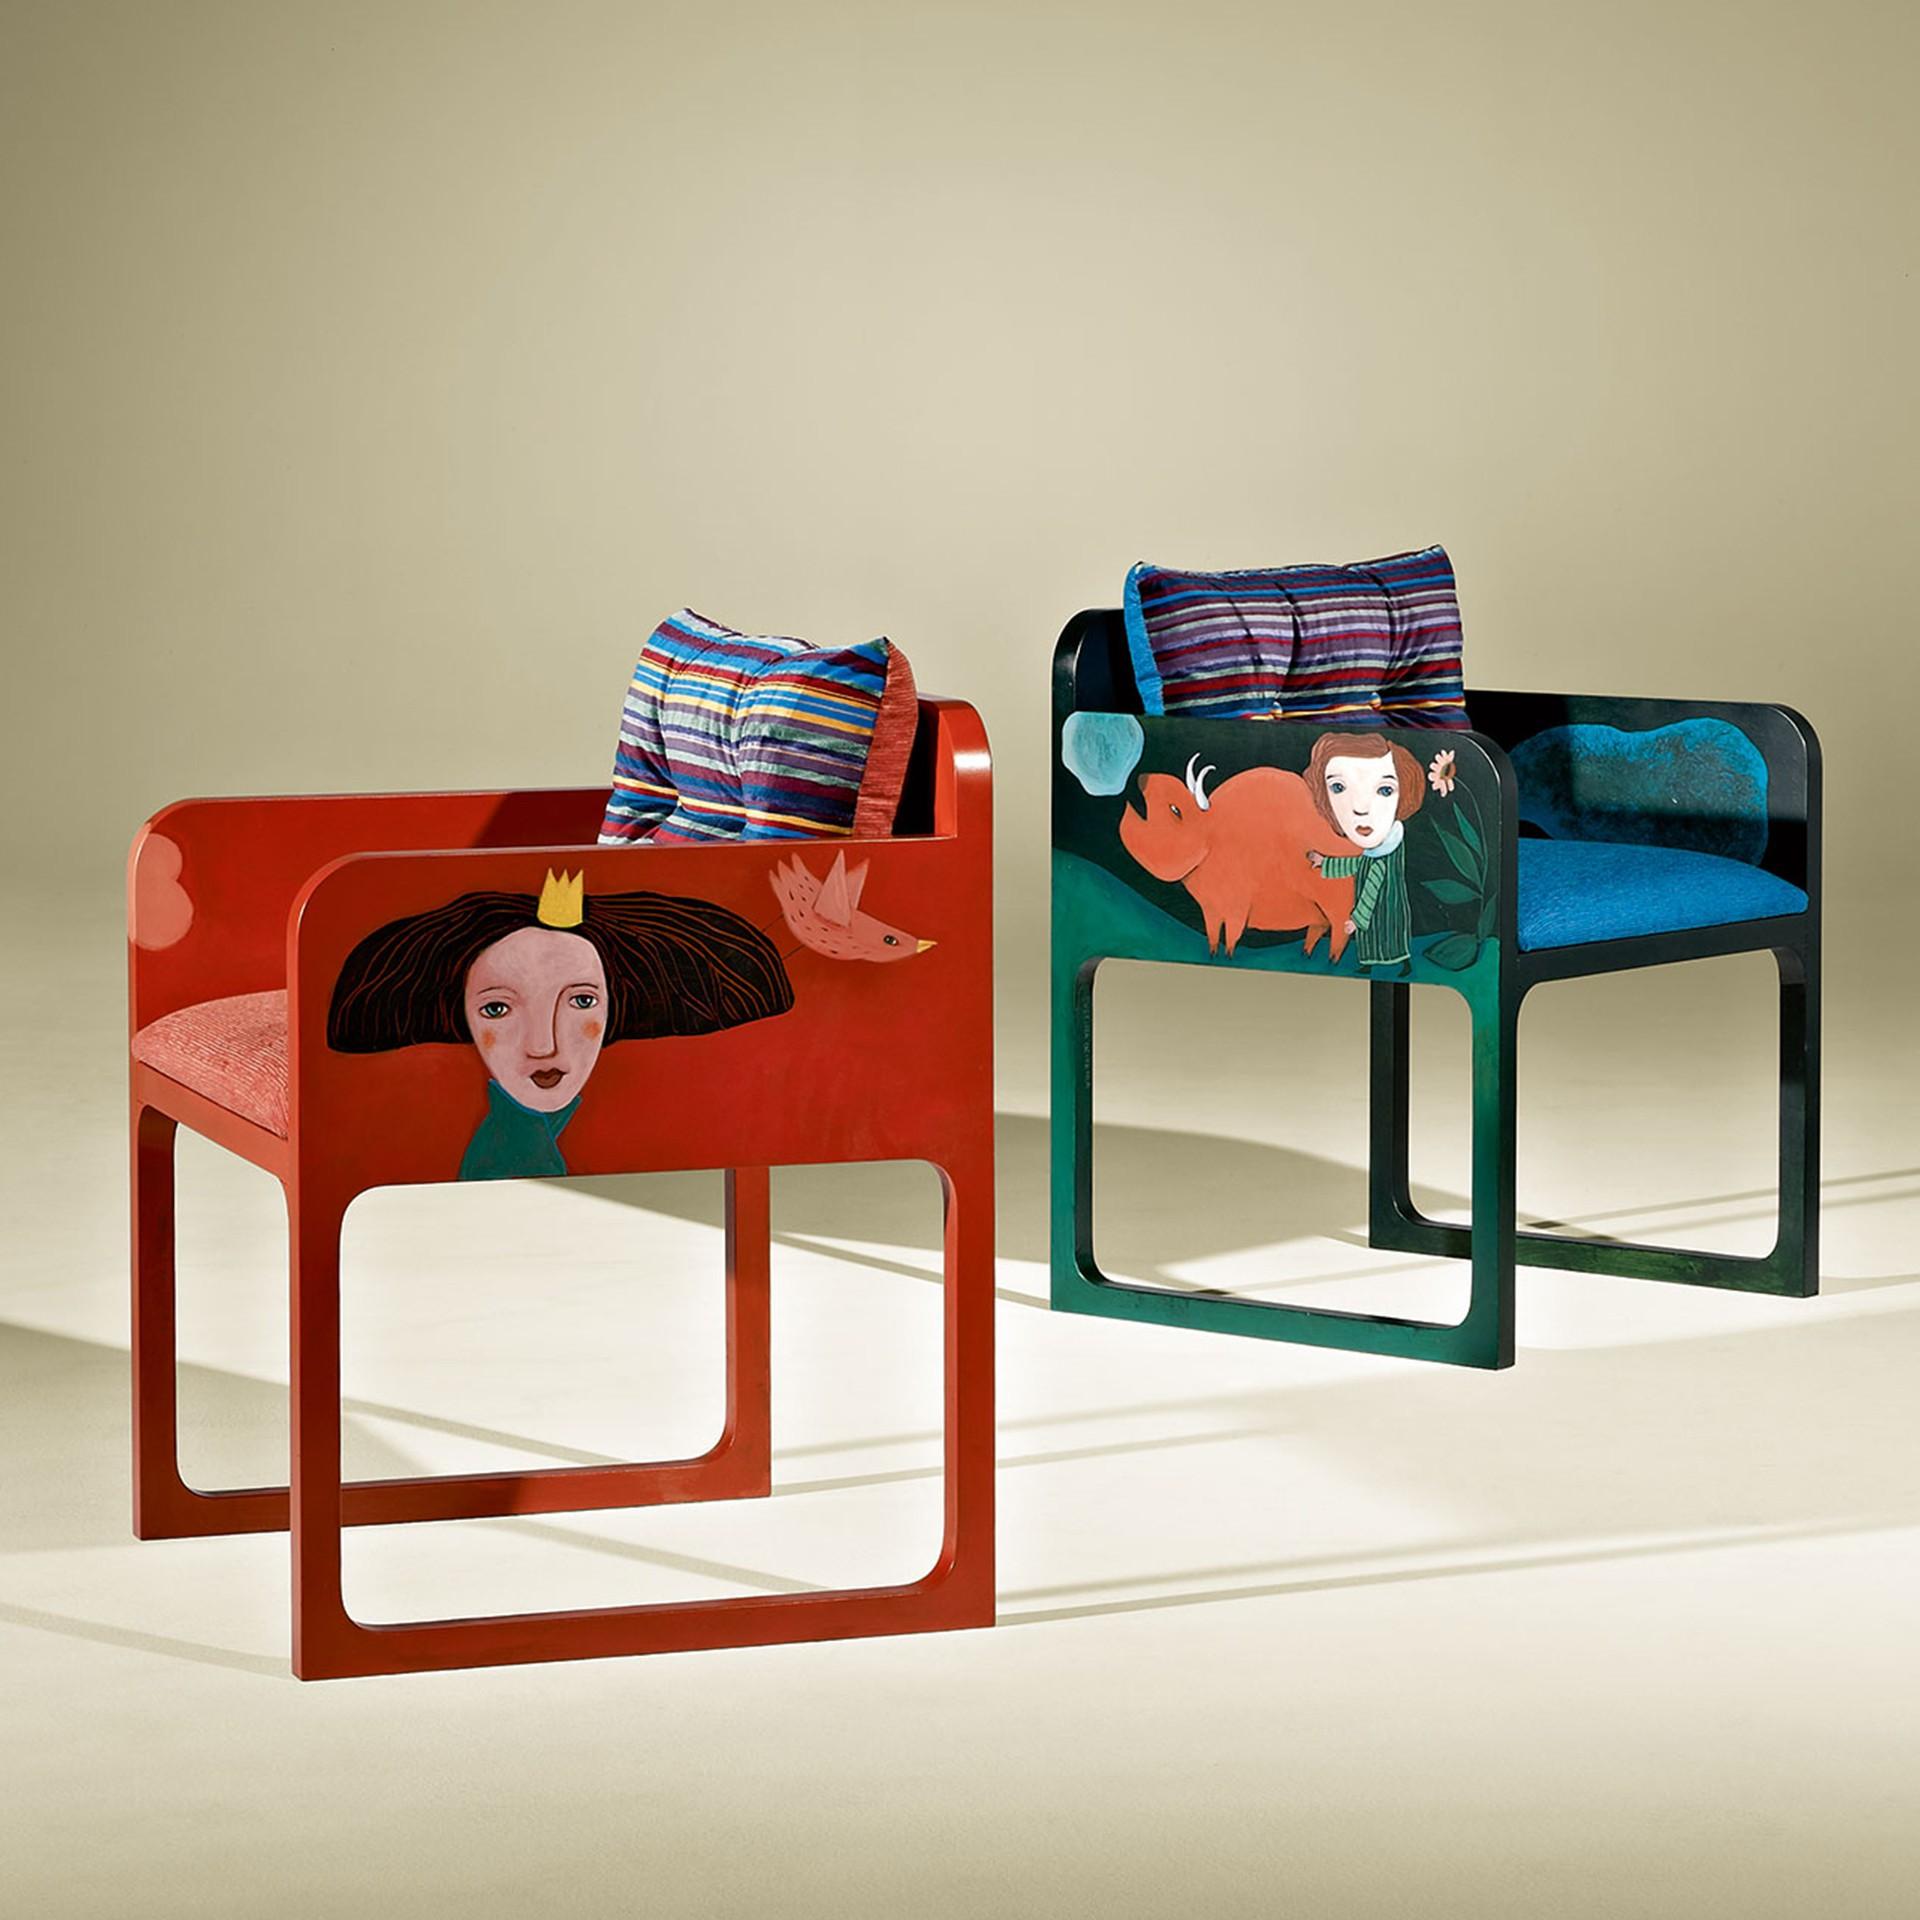 Dream blue dream orange contemporary armchairs with artistic intervention by Evelina Oliveira, in lacquer and LELIEVRE Upholstery.

Bespoke / Customizable
Identical shapes with different sizes and finishings.
All RAL colors available. (matt /